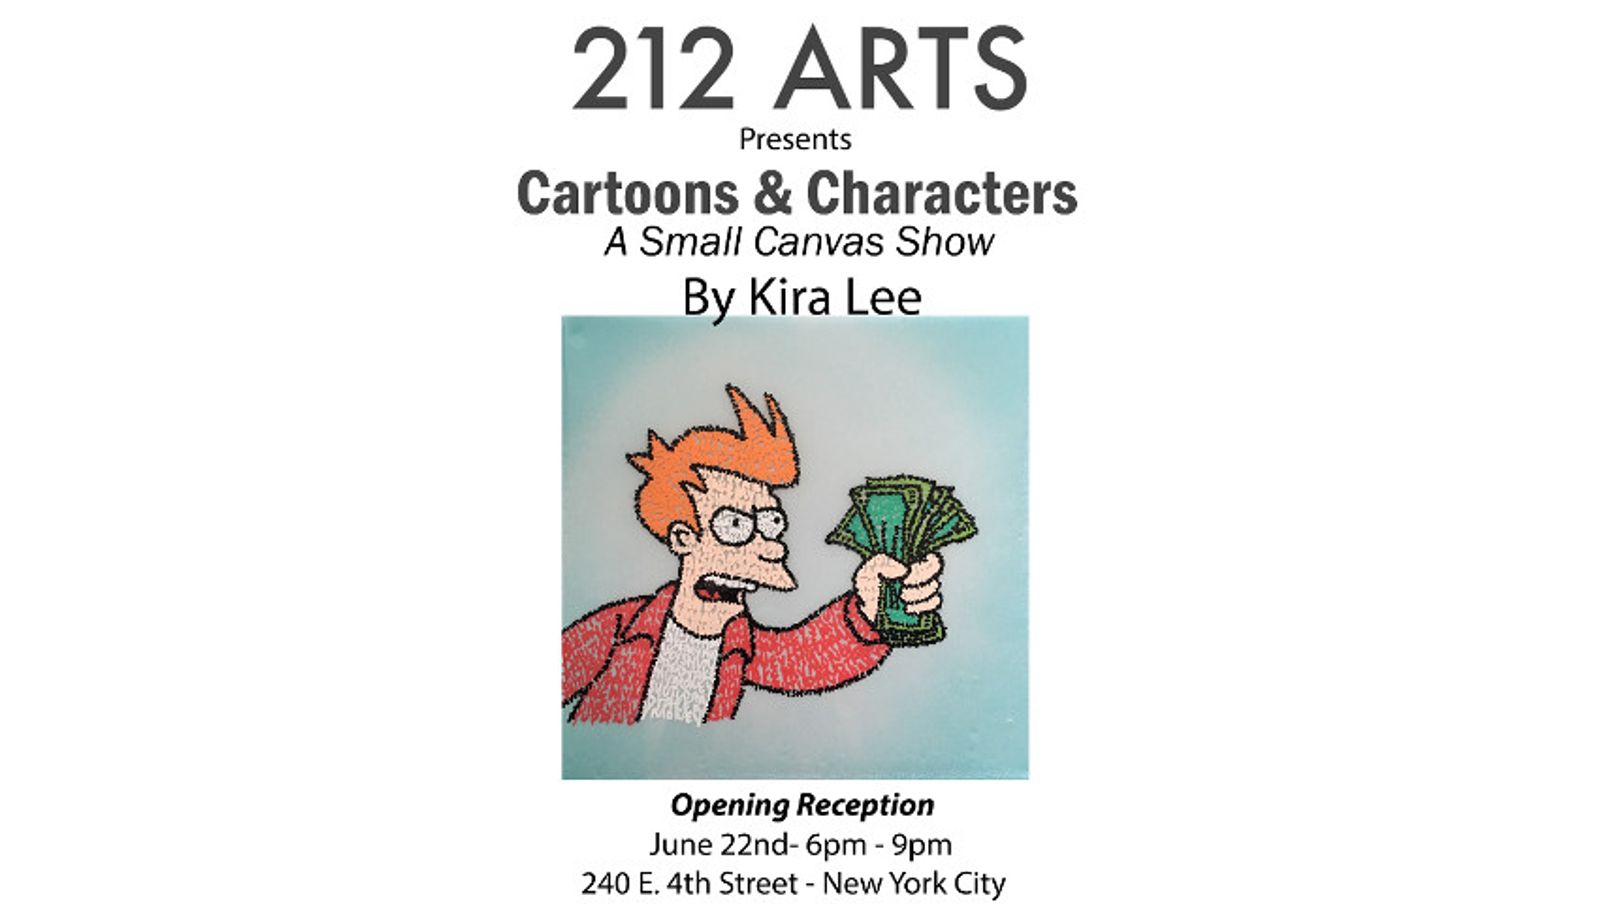 Kira Lee Returns to 212 Arts for Solo Show